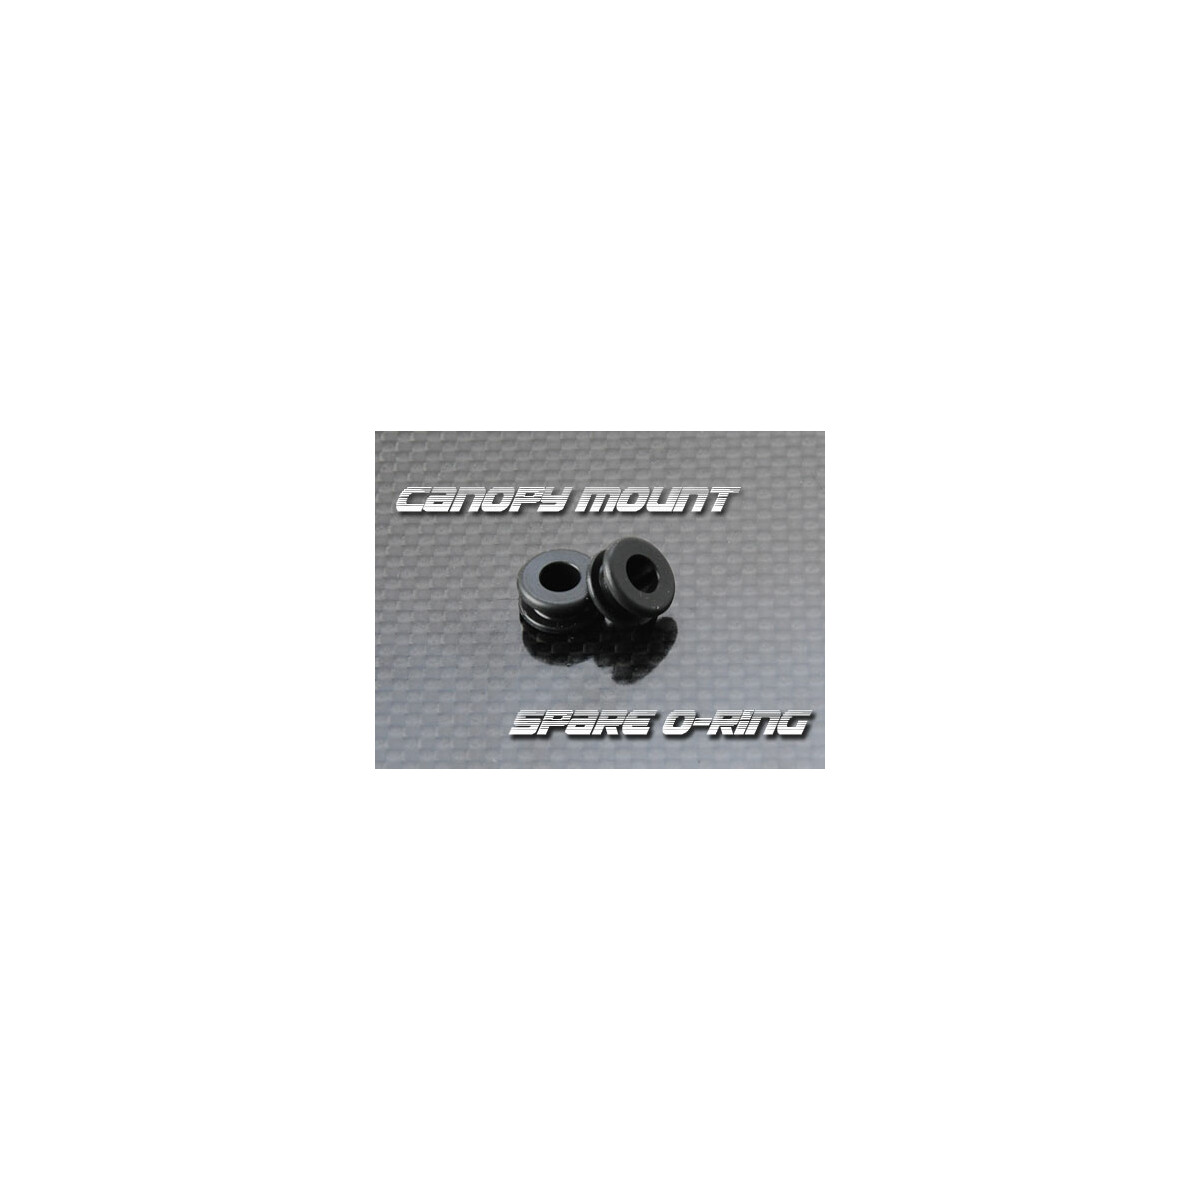 Canopy Mount Spare O-ring - 2 pcs